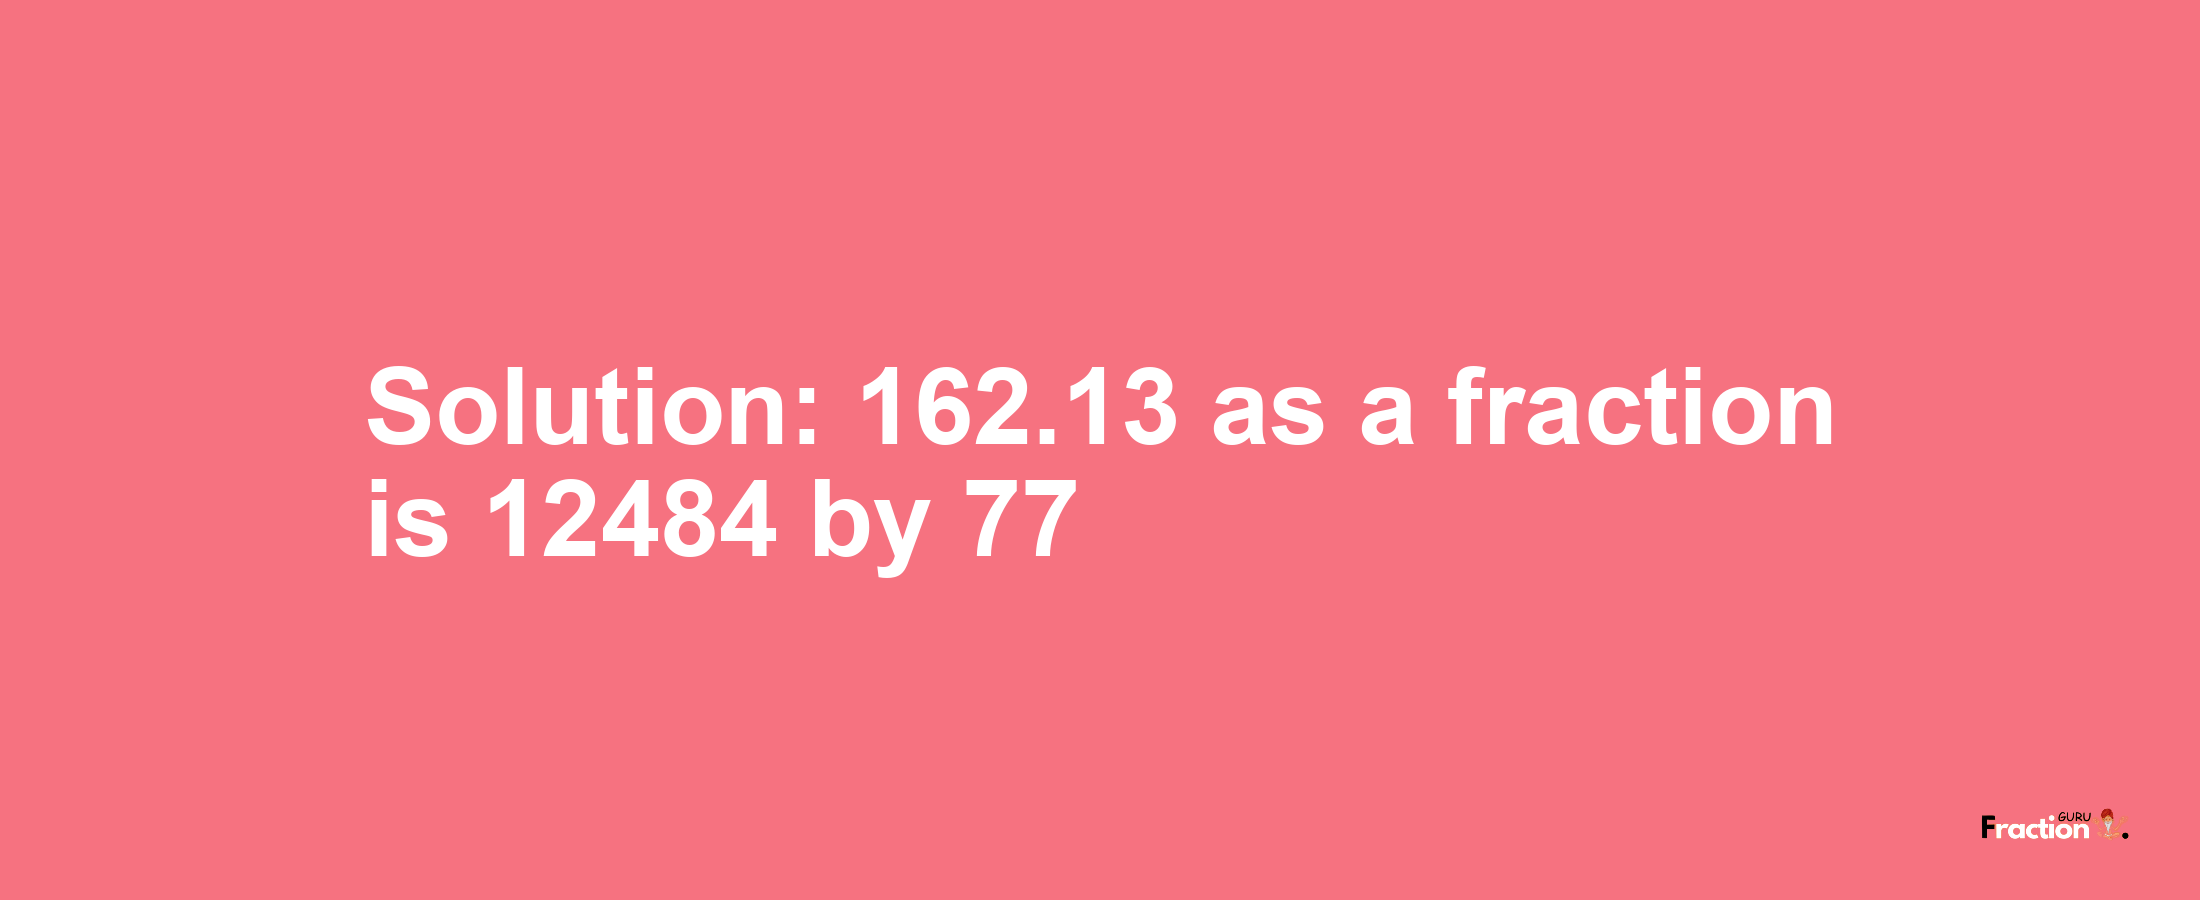 Solution:162.13 as a fraction is 12484/77